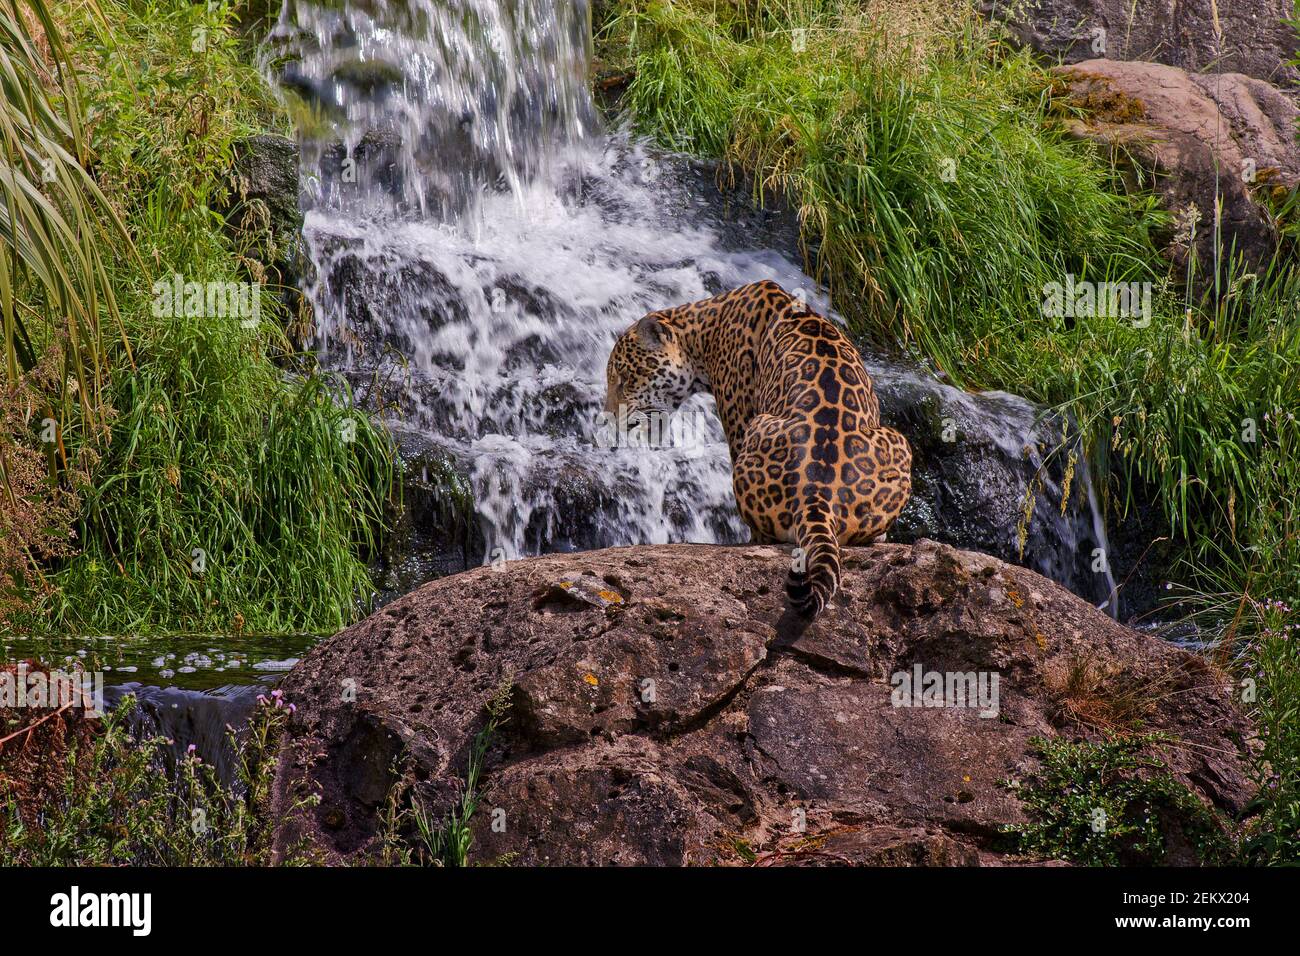 Jaguar, panthera onca, big cat, wildlife, South America, Mexico, Central, ferocious cats, predator, threatened species, cute but deadly Stock Photo